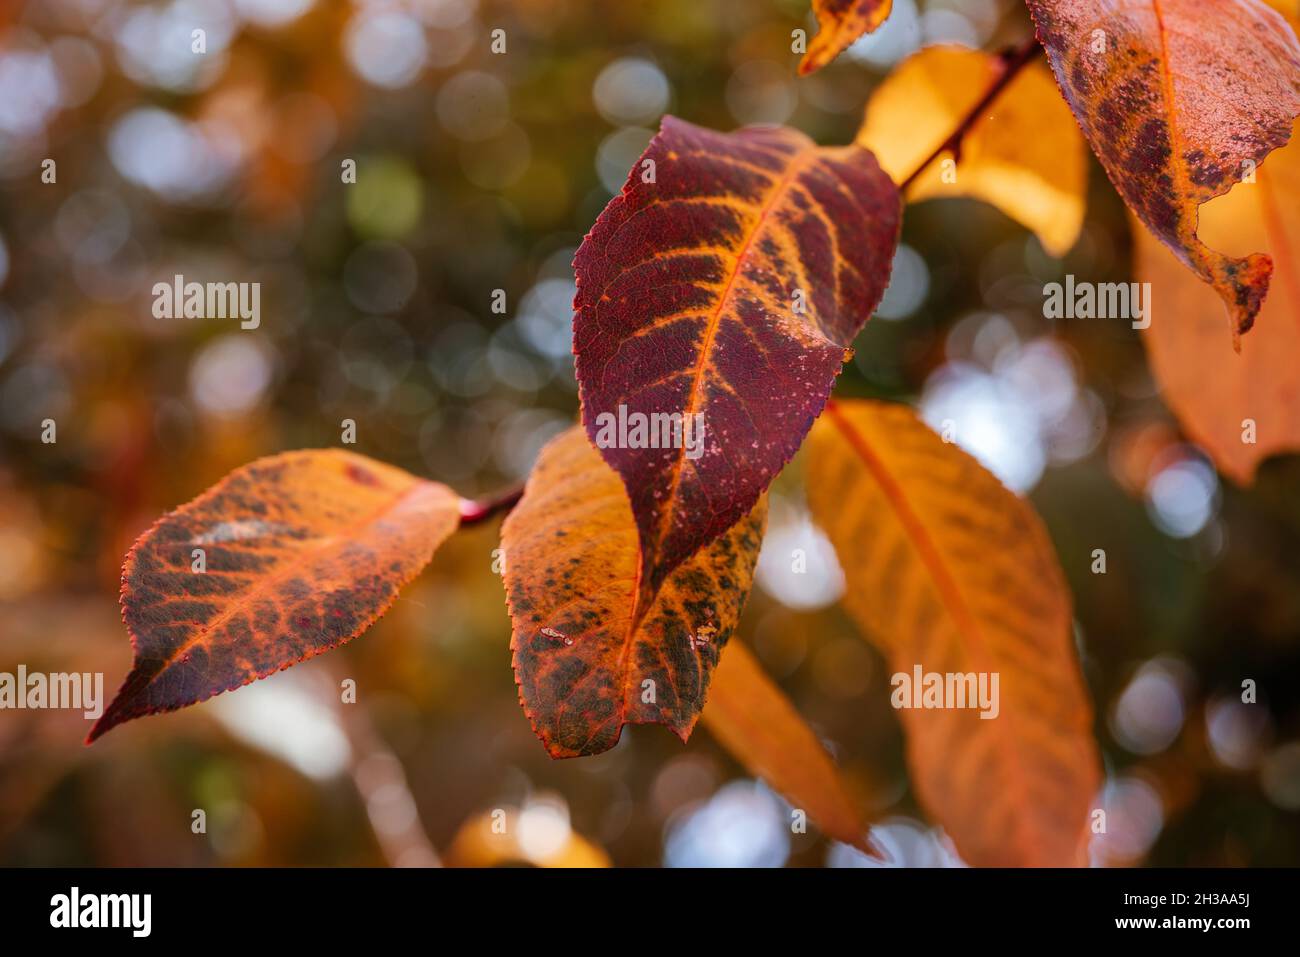 Colorful atumn leaves during fall season, orange and yellow leaves in the tree Stock Photo